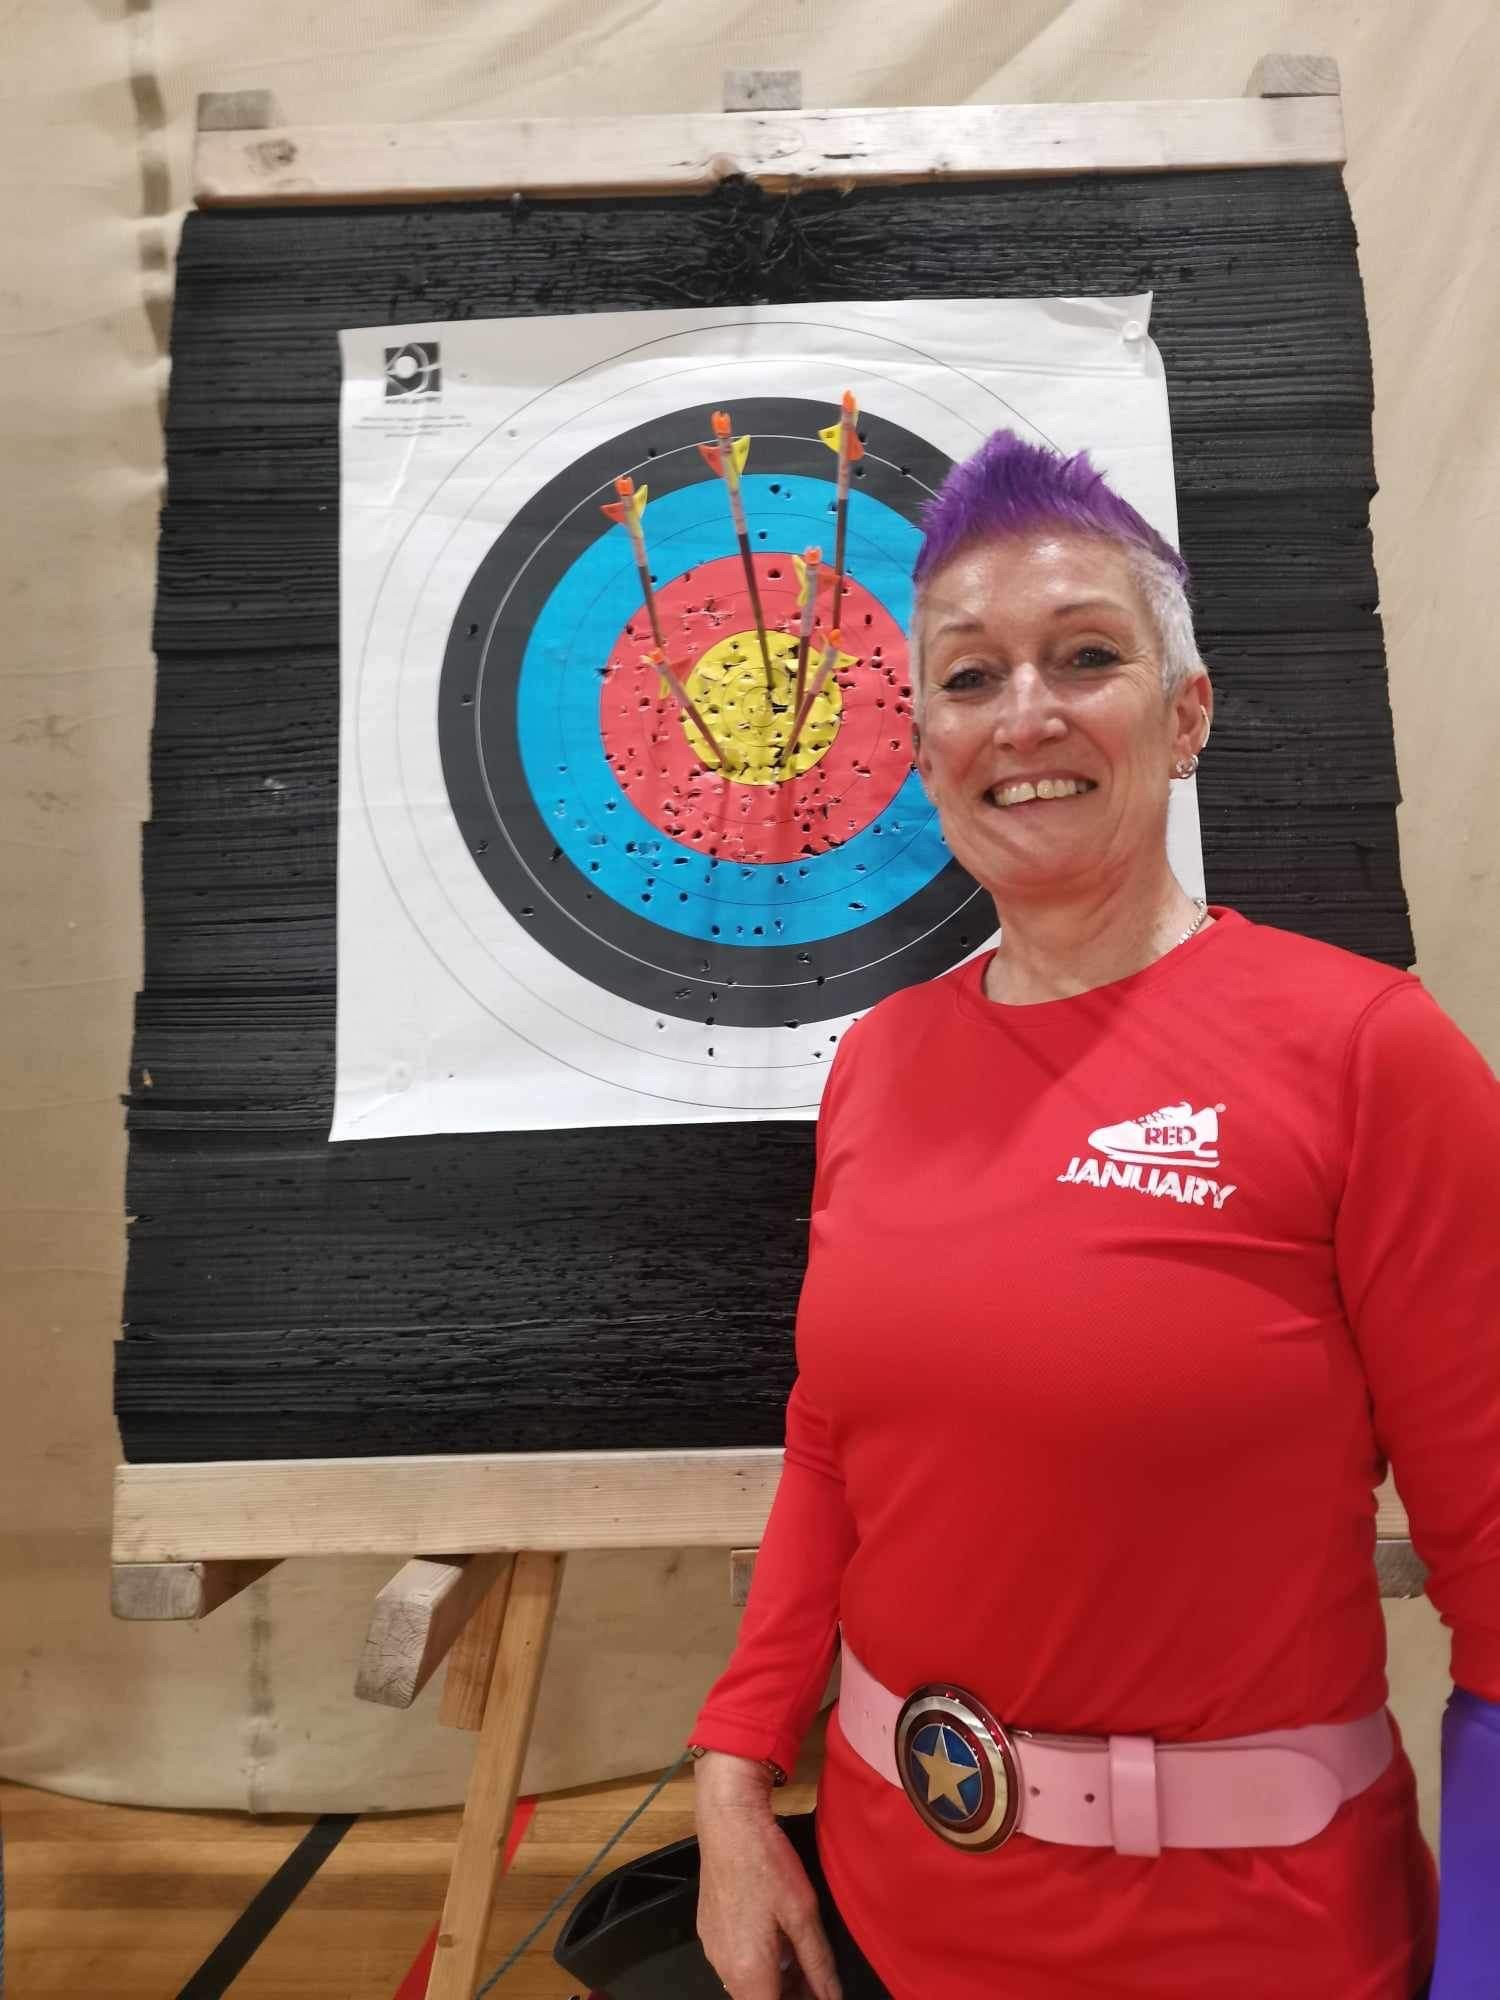 Mandie Elson wearing a Red January t-shirt, standing in front of an archery target